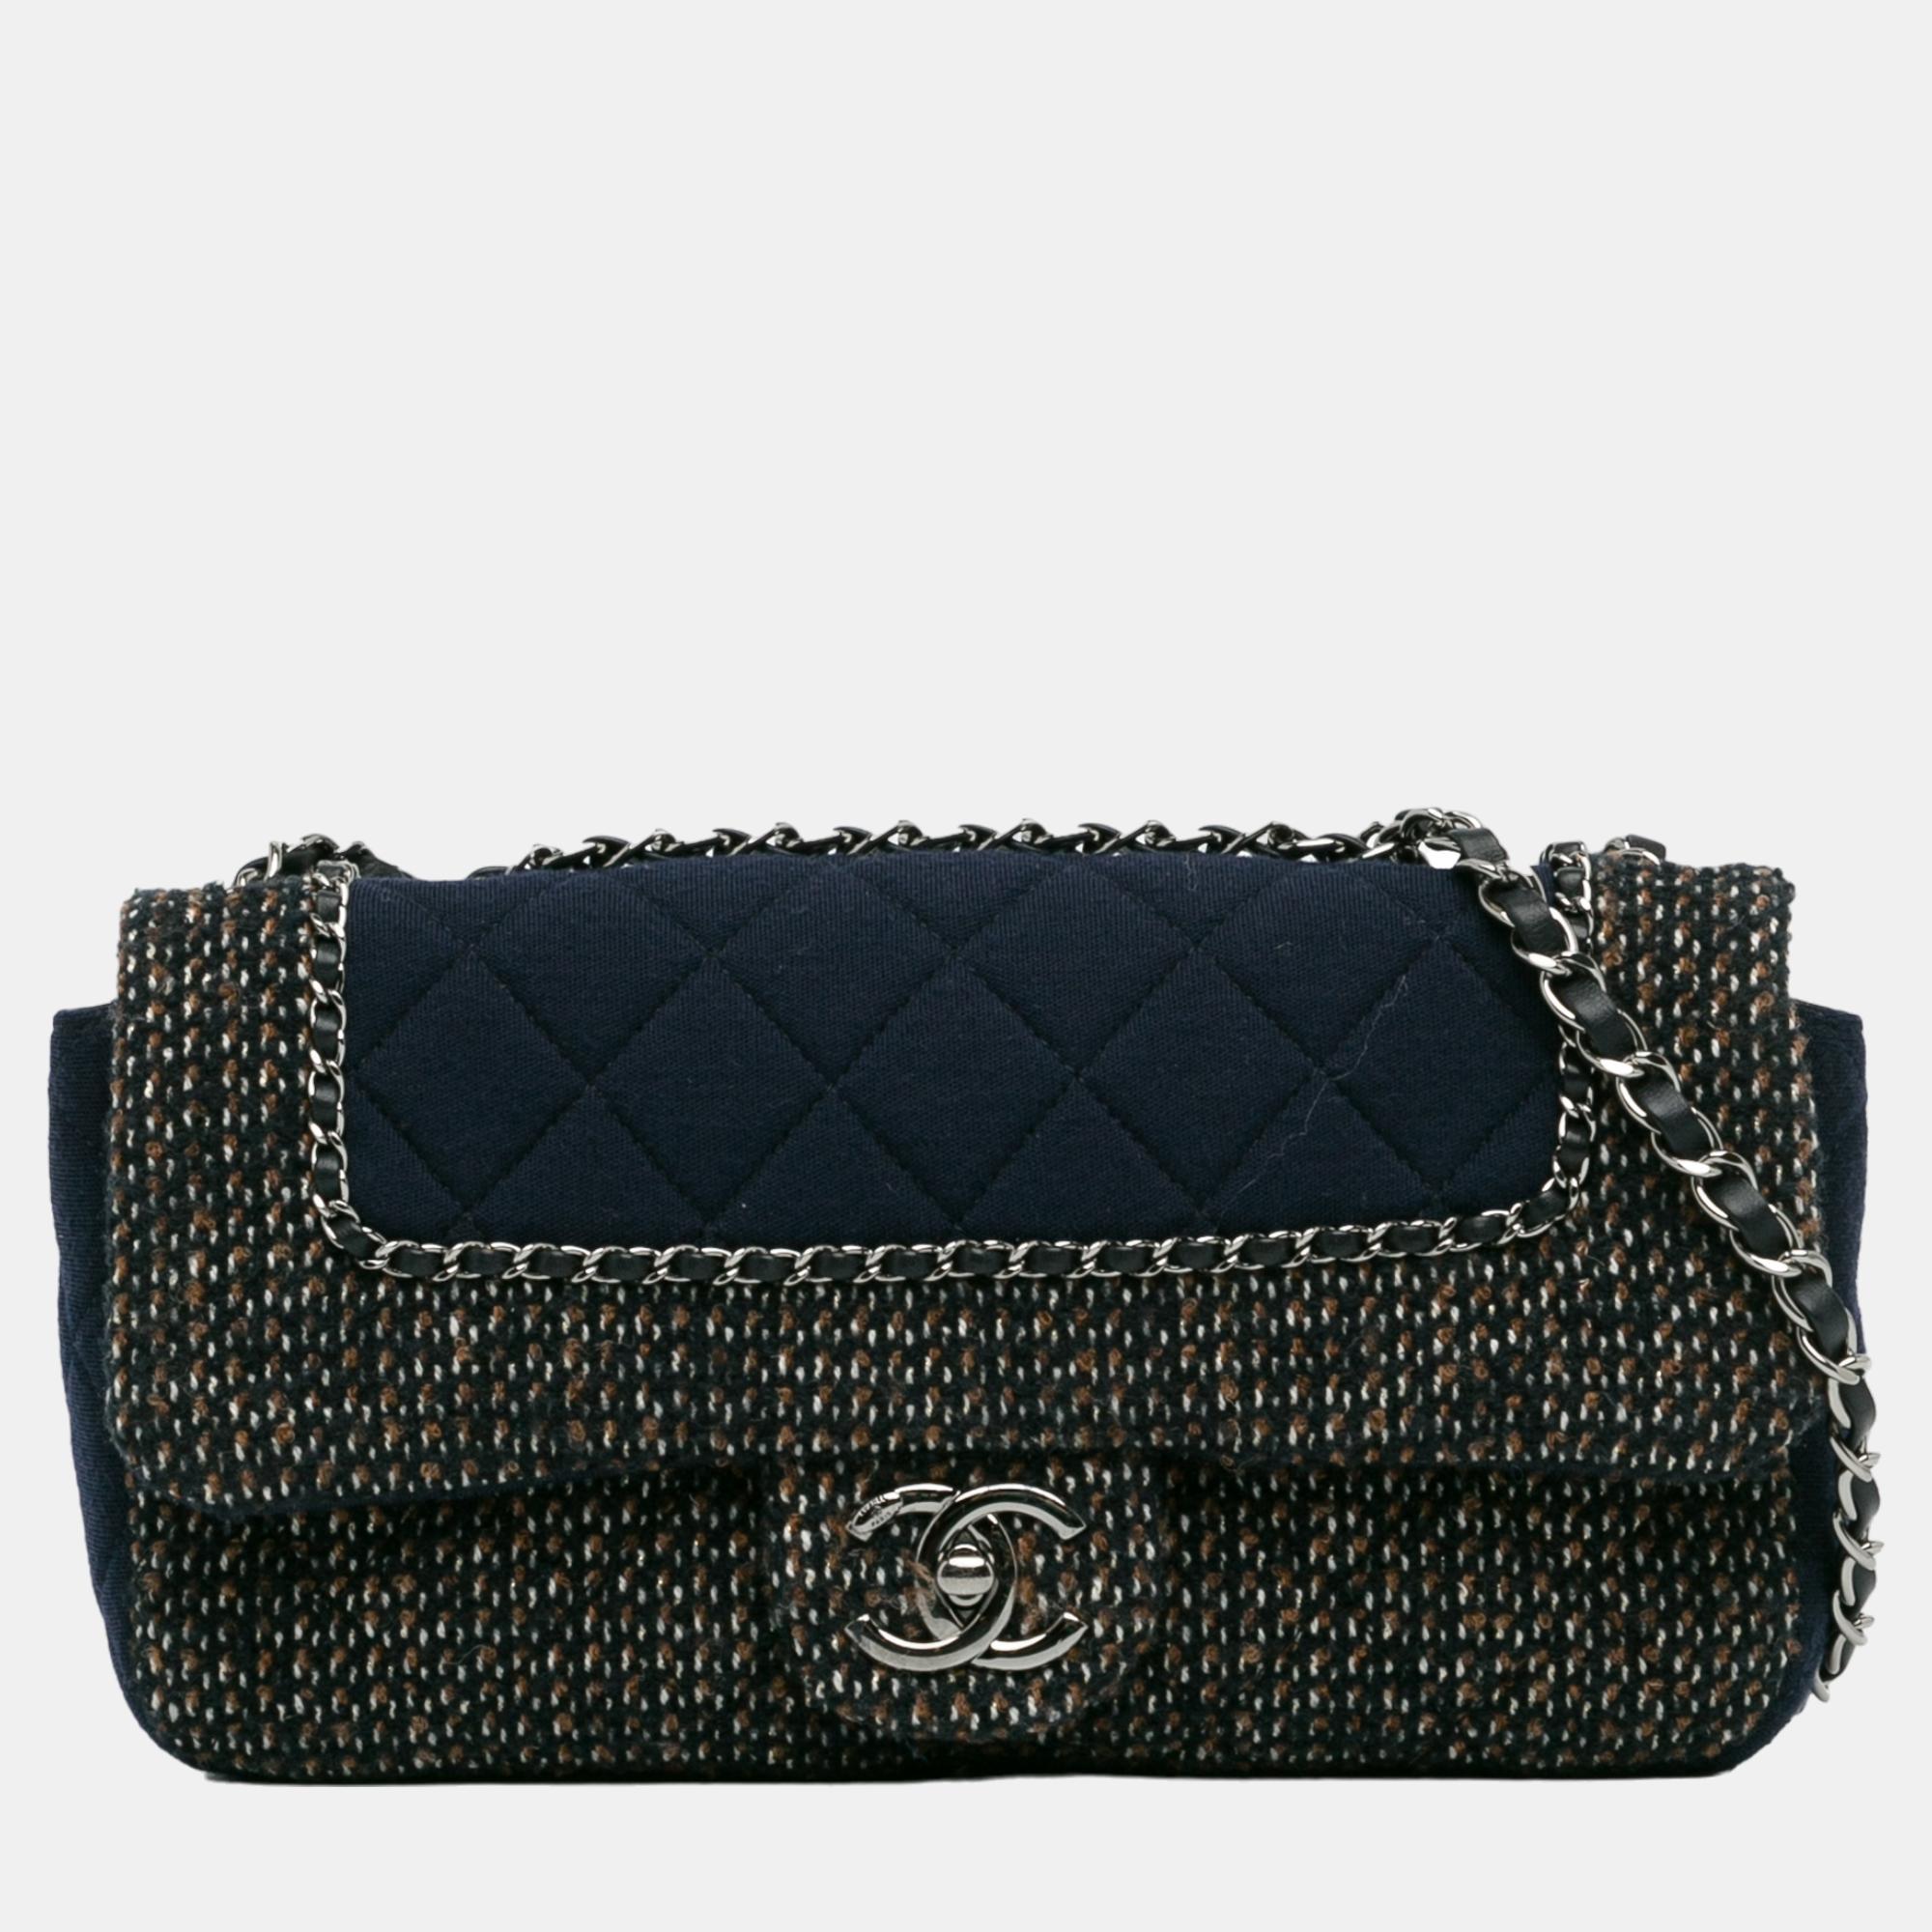 Chanel black small jersey tweed flap